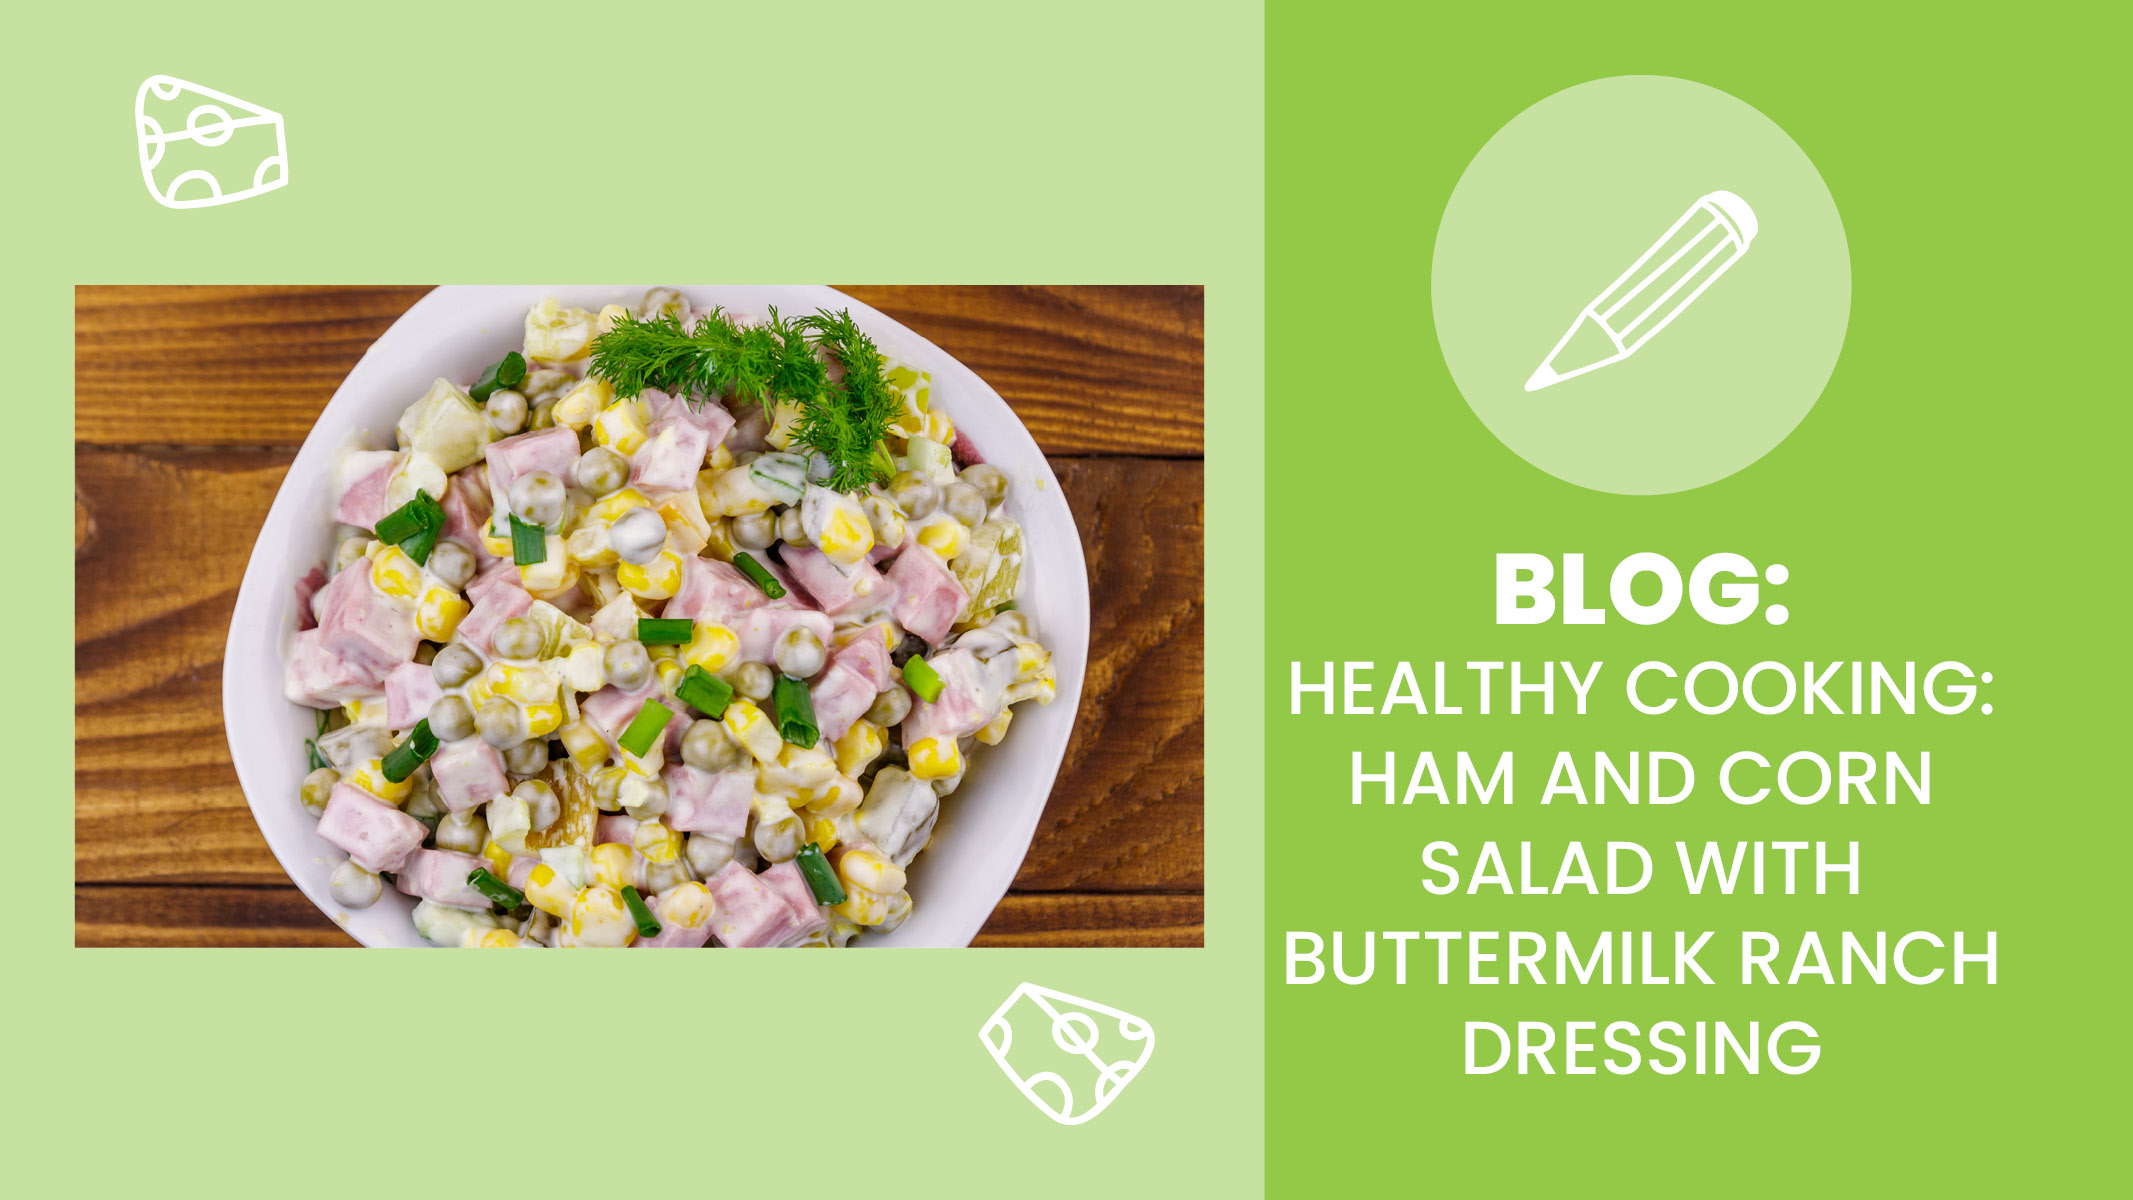 Bowl of healthy ham and corn salad made as a snack